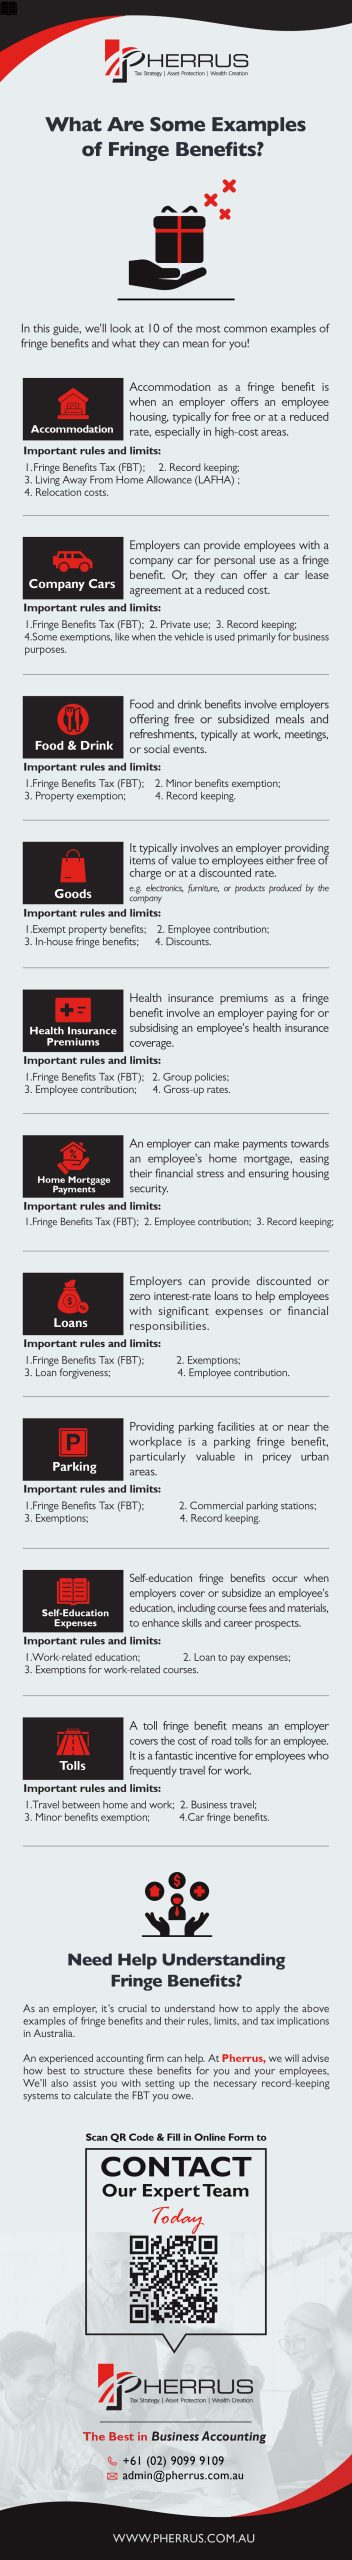 What Are Some Examples of Fringe Benefits Infographic